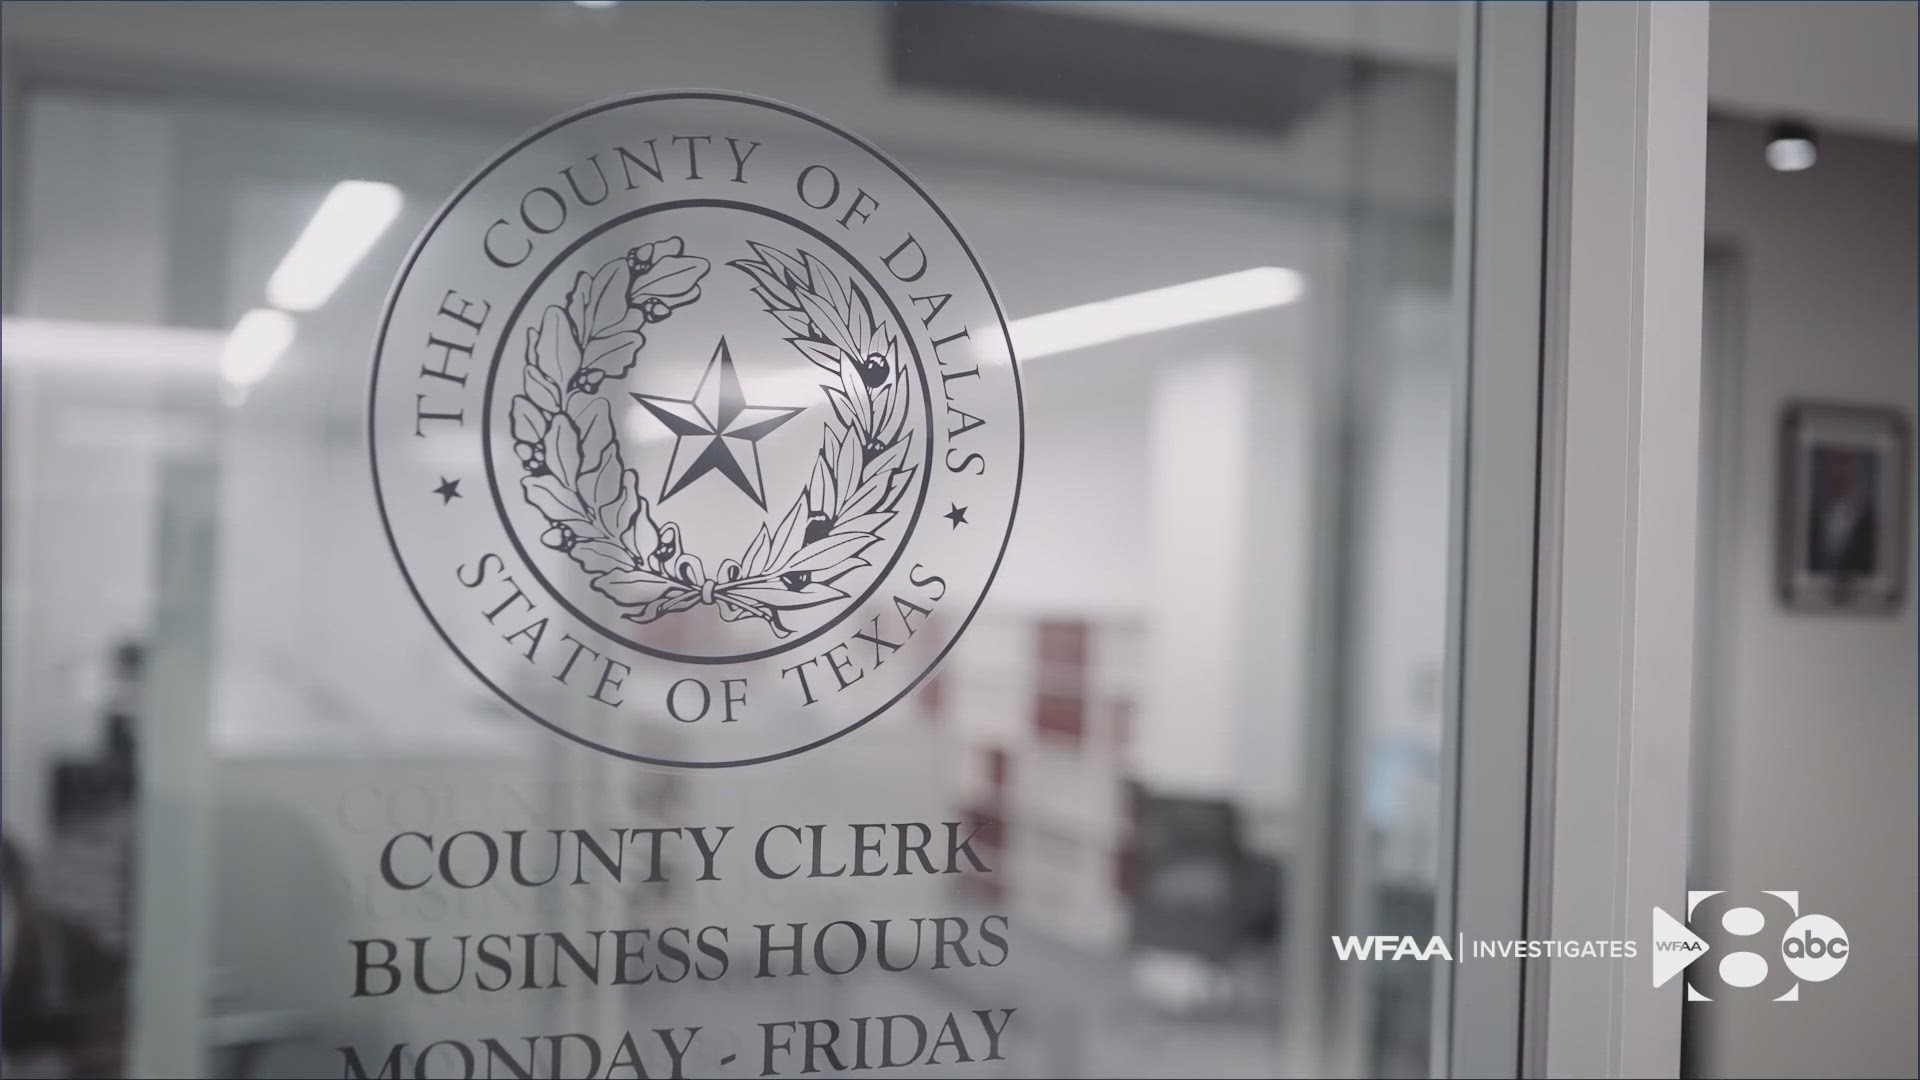 Since 2019, WFAA’s “Dirty Deeds” investigation has exposed how thieves have stolen properties they don't own by filing fraudulent deeds with county clerks.